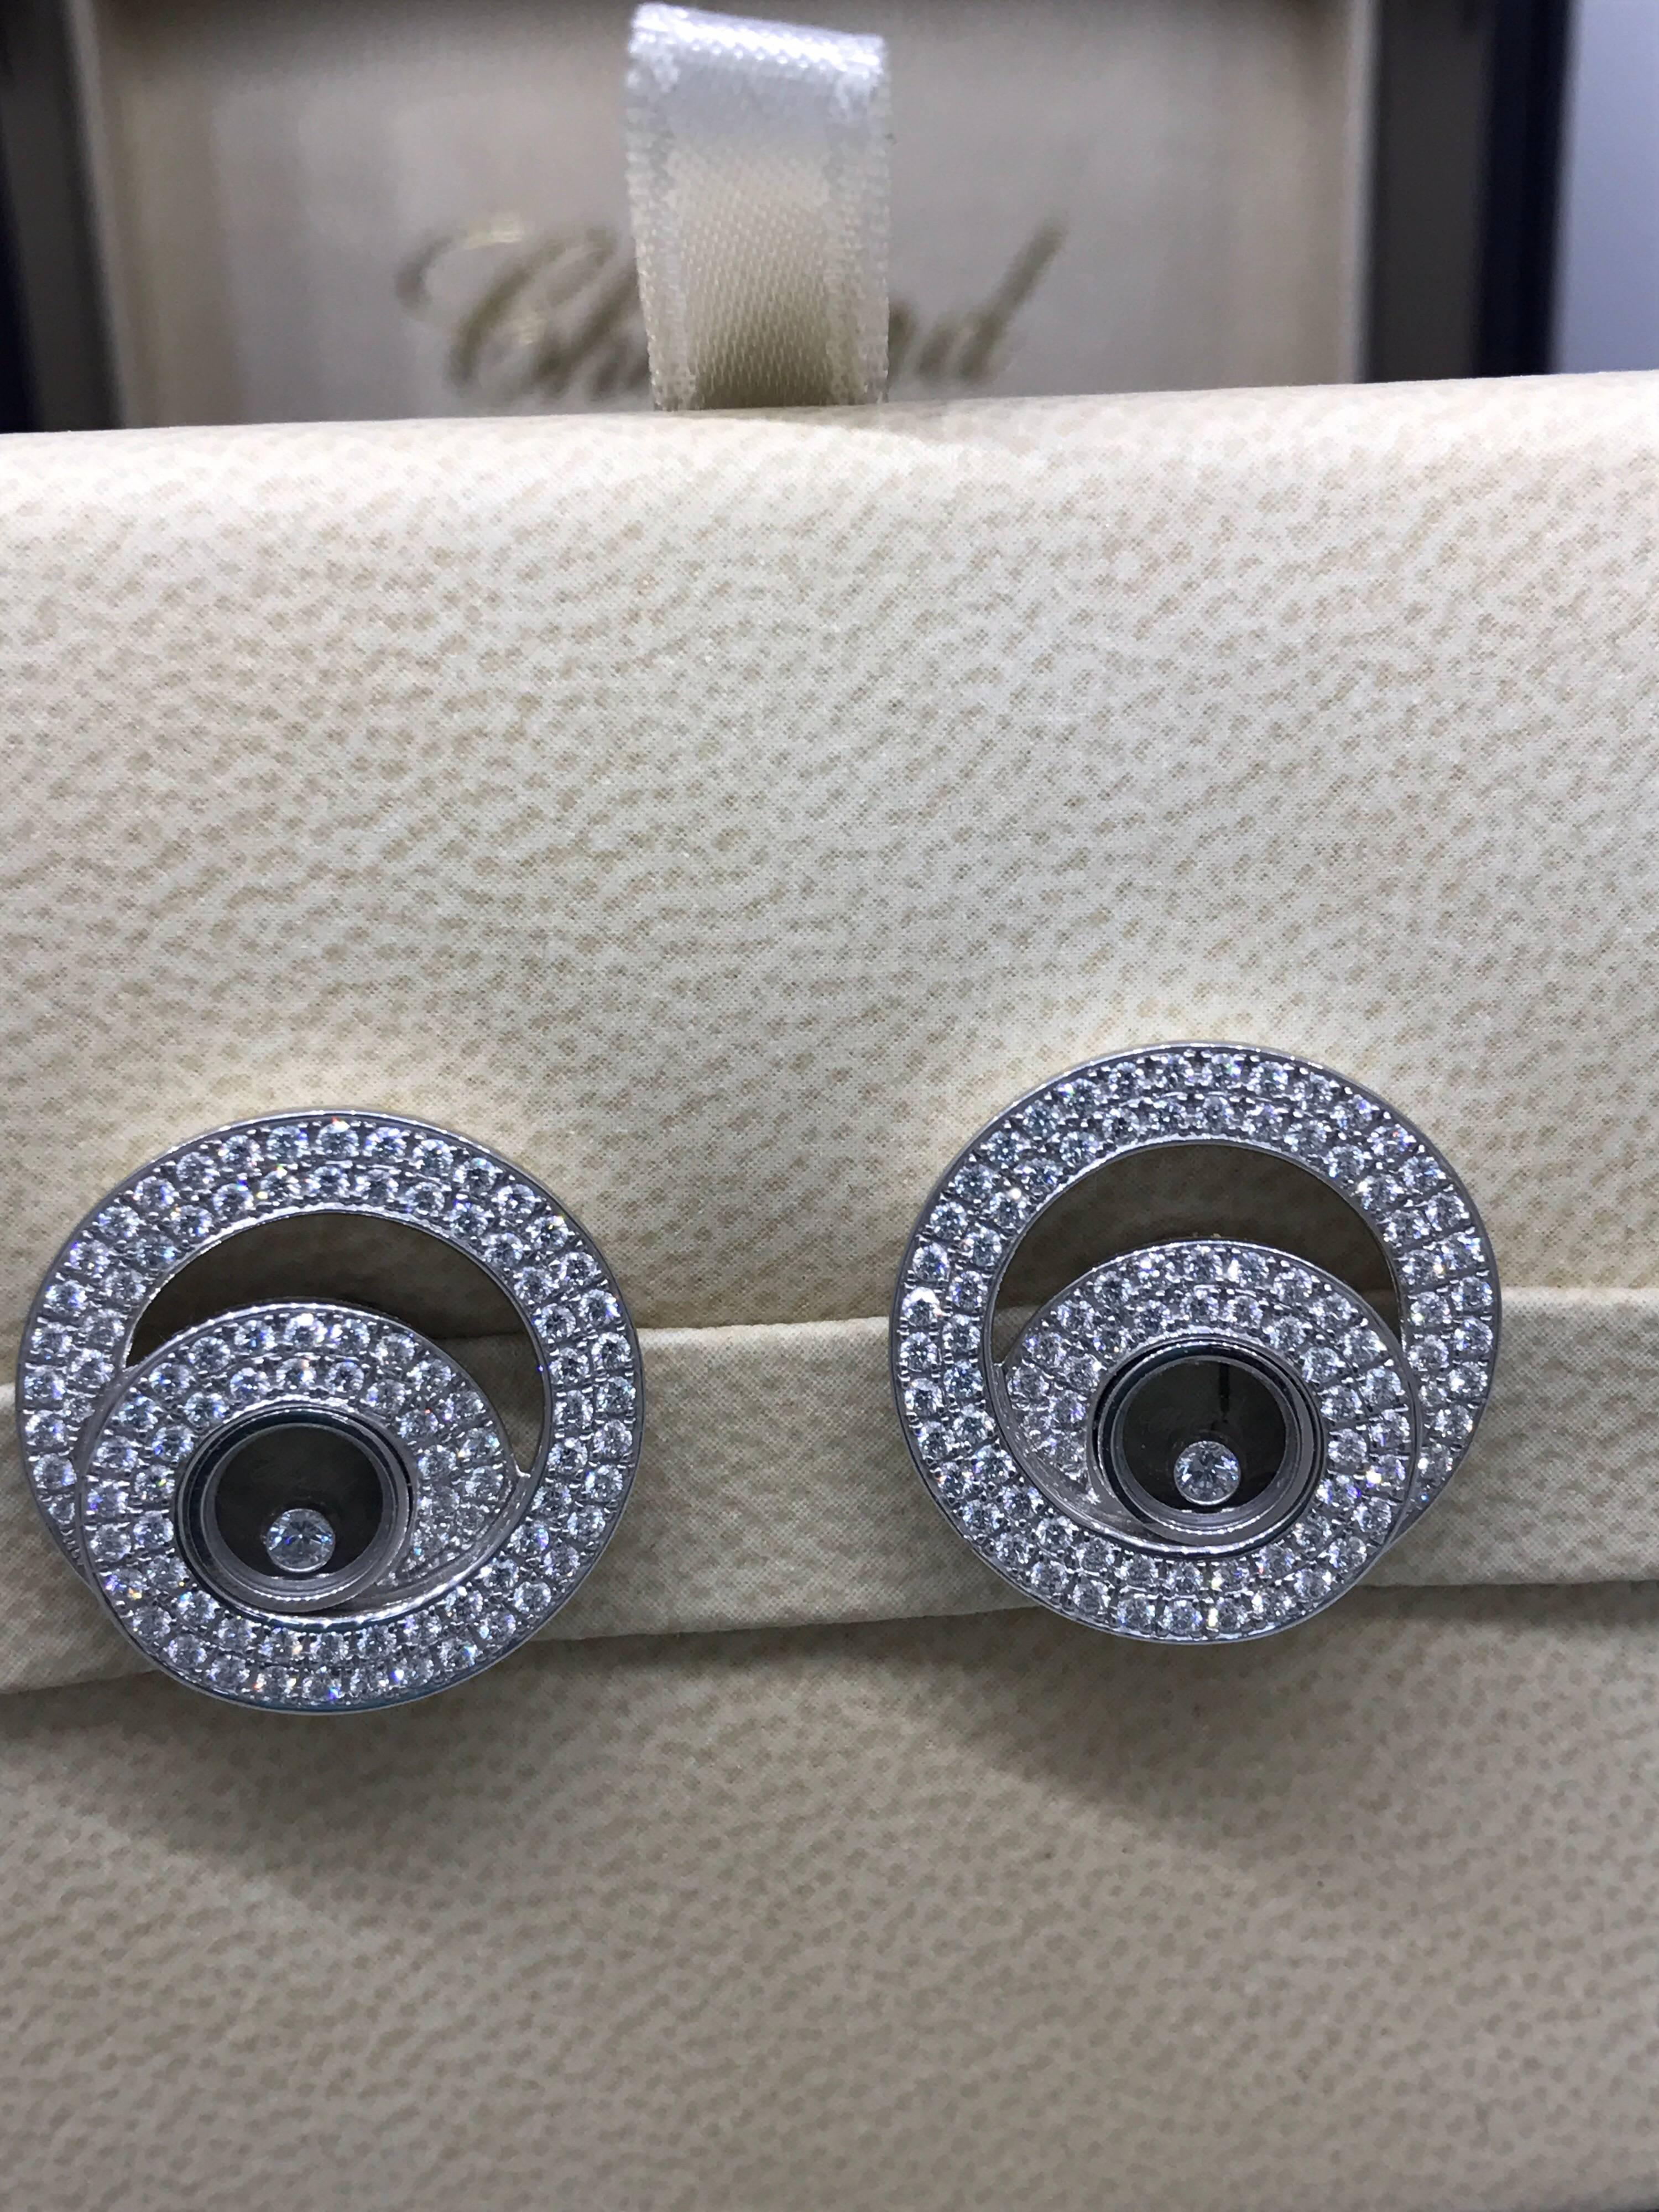 Chopard Happy Diamonds Earrings

Model Number: 83/7109-1001

100% Authentic

Brand New

Comes with original Chopard box, certificate of authenticity and warranty, and jewels manual

18 Karat White Gold

186 Diamonds Total on the Earrings (1.46